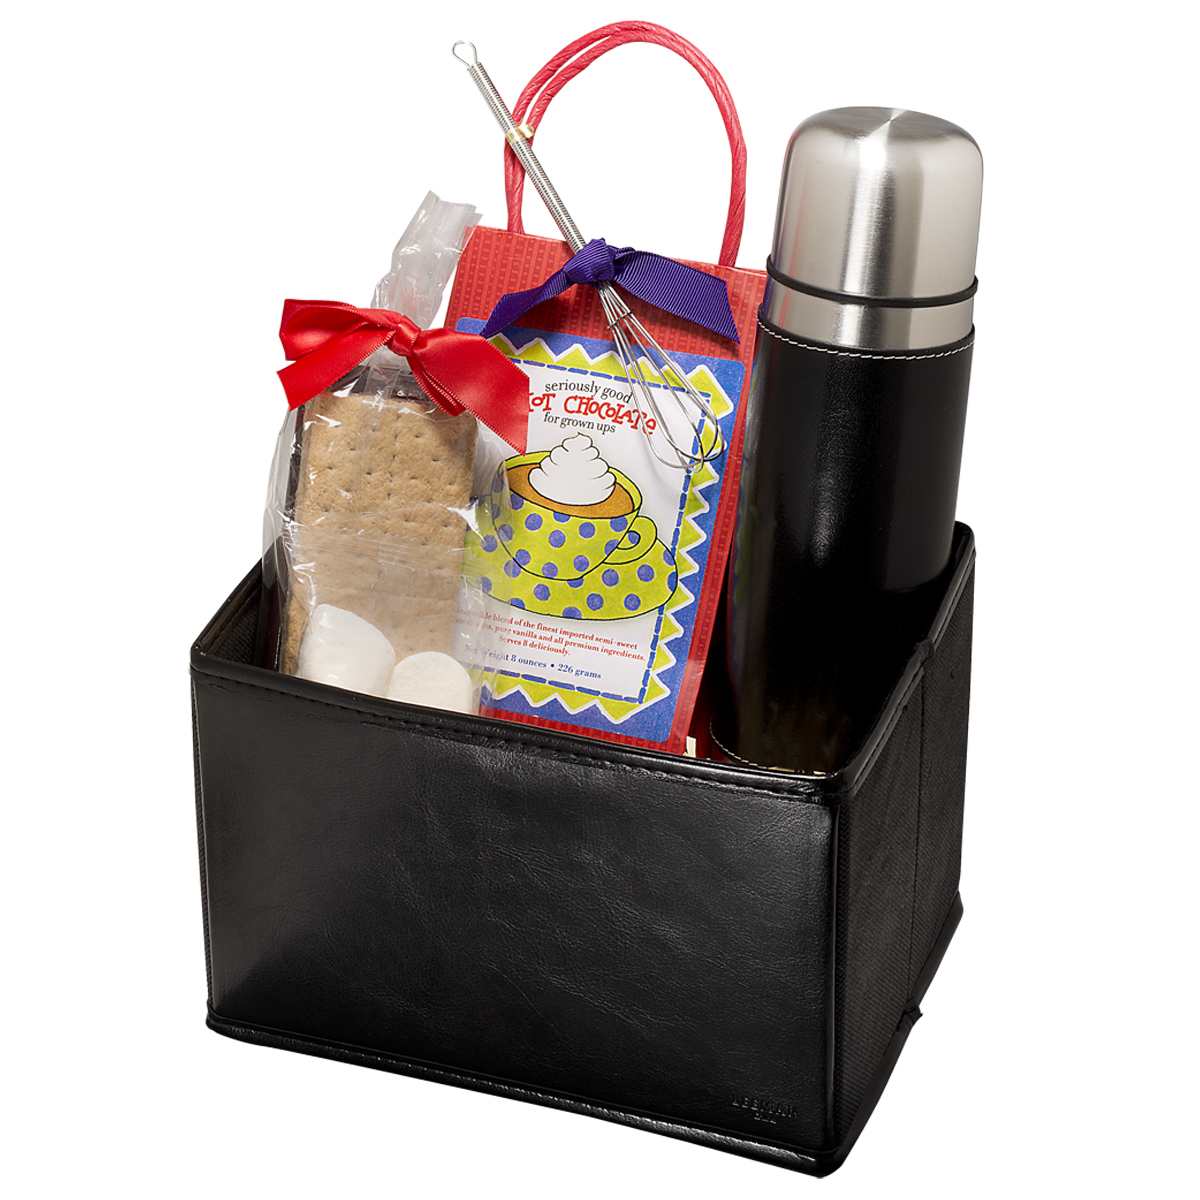 Tuscany™ Thermal Bottle, Hot Chocolate & S'mores Gift Set